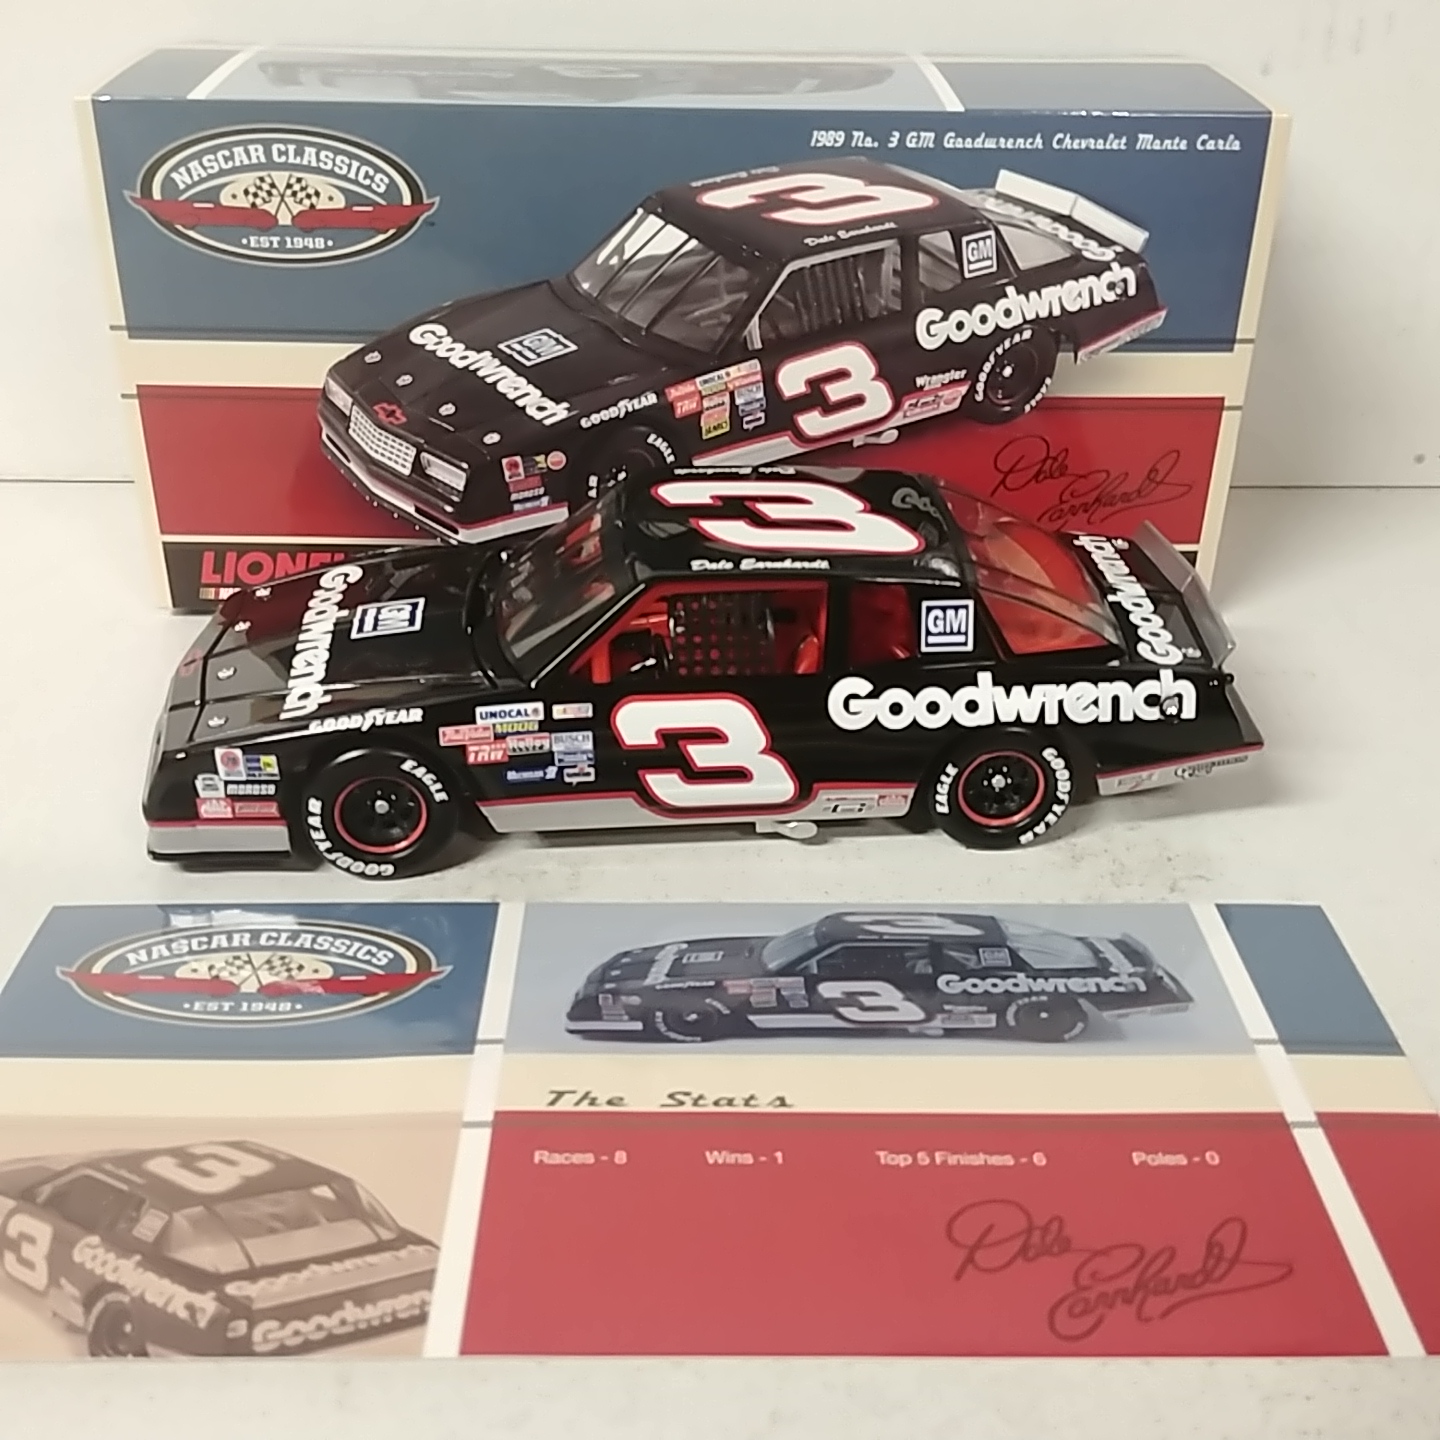 1989 Dale Earnhardt 1/24th Goodwrench Monte Carlo